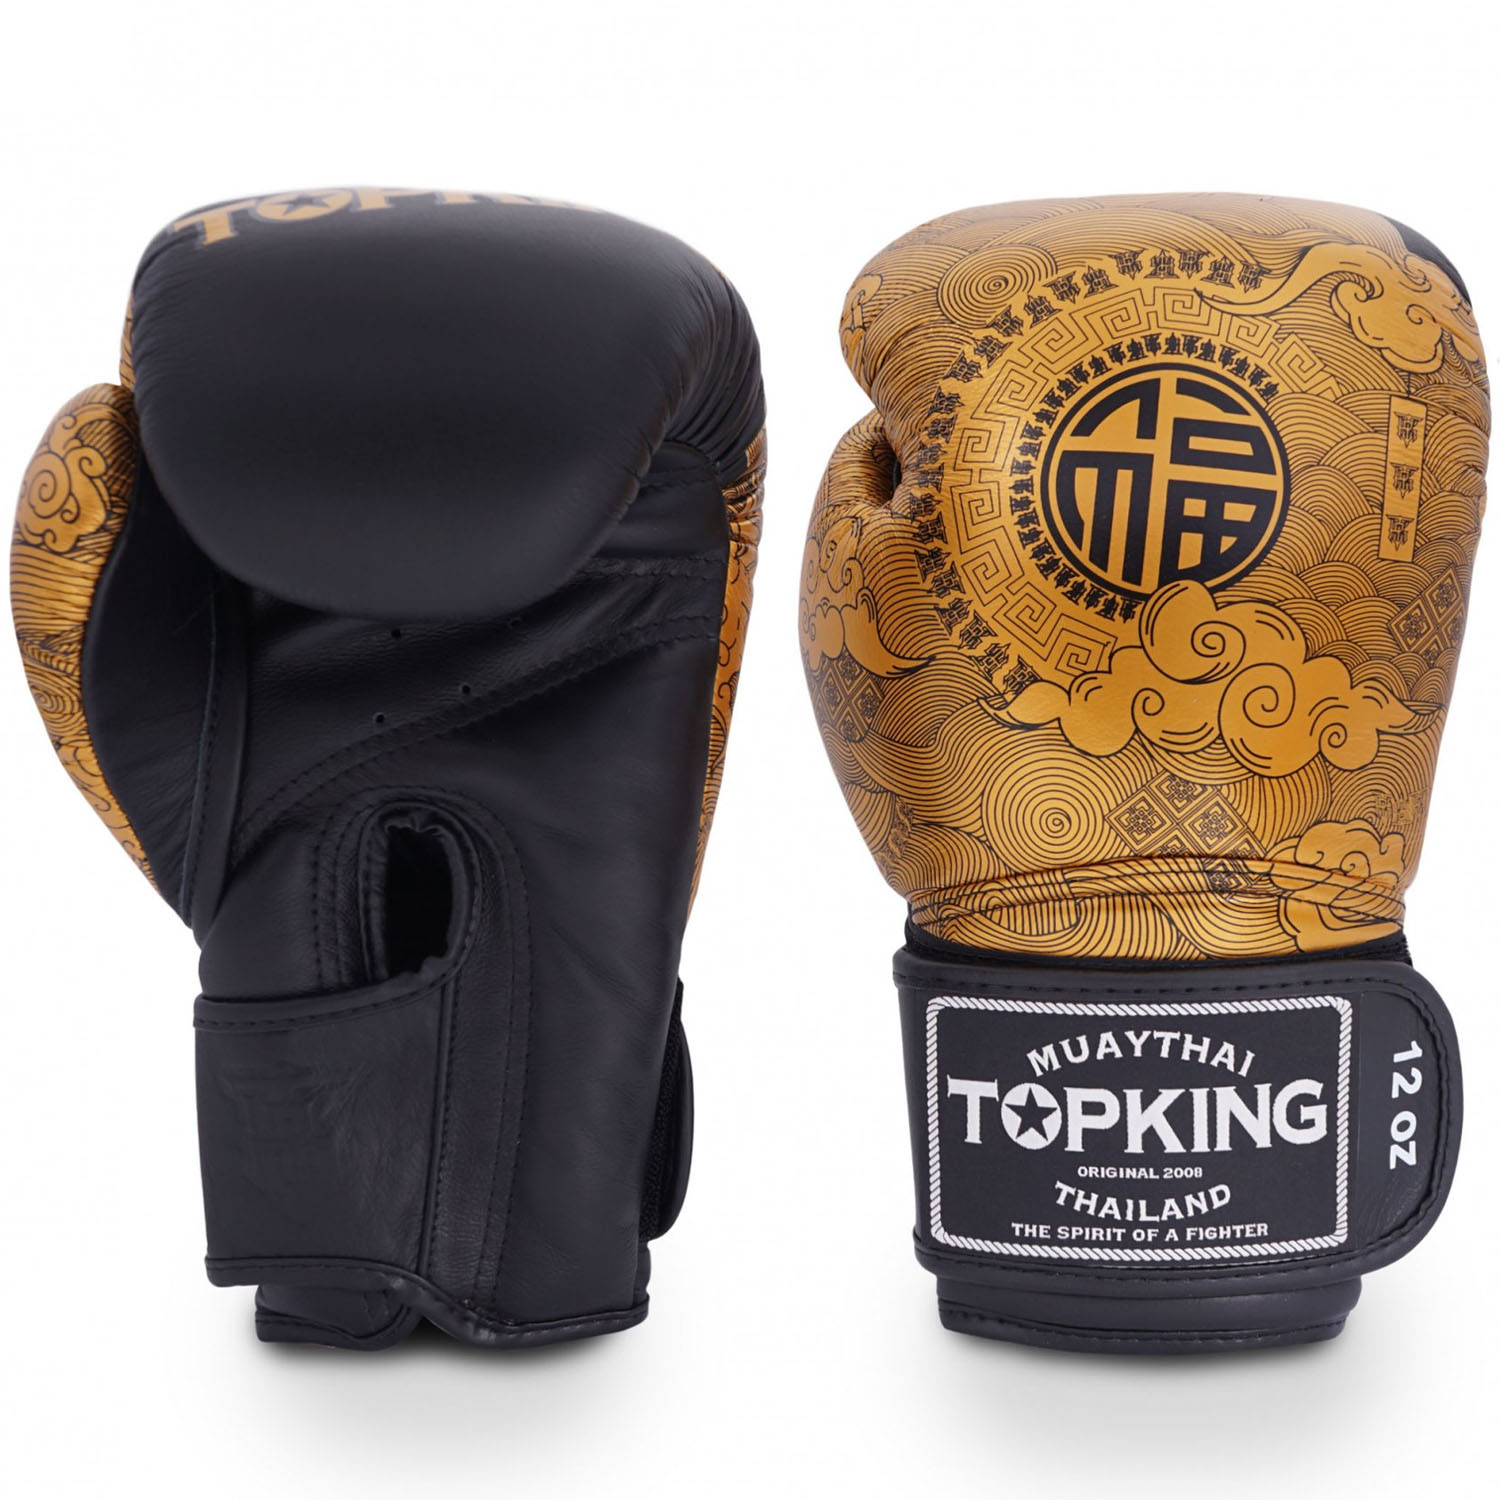 TOP KING BOXING Boxhandschuhe, Happiness Chinese, gold-schwarz, 10 Oz